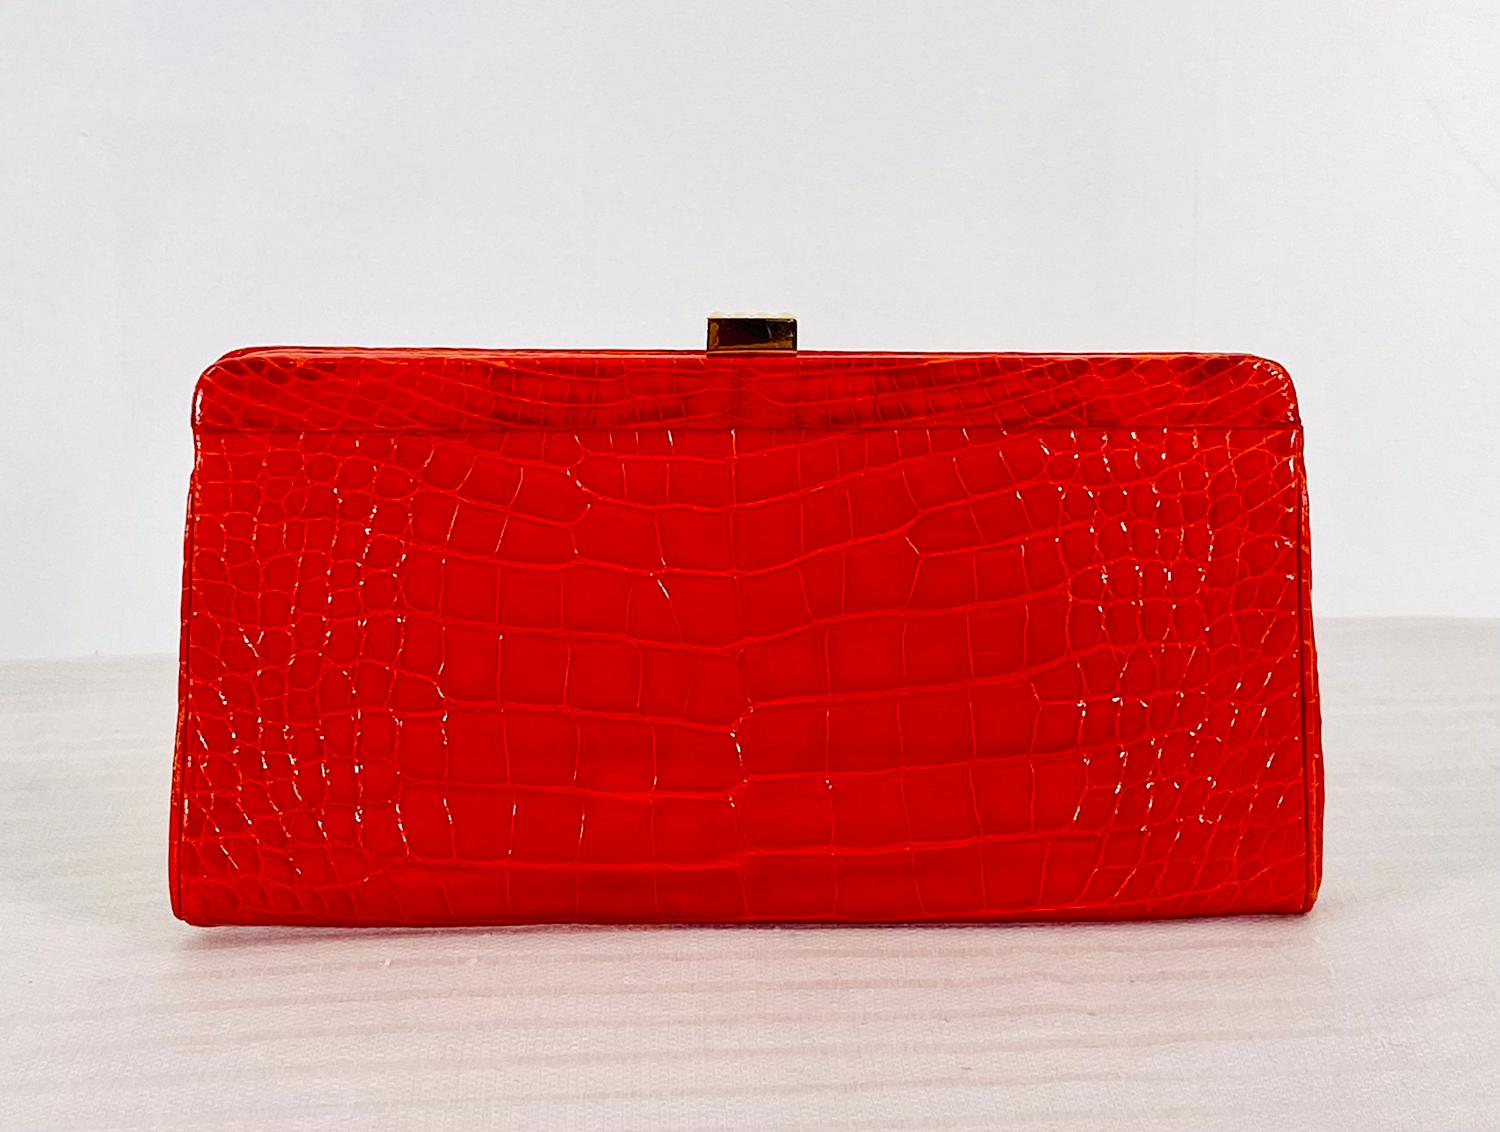 Finesse La Model glazed orange alligator clutch handbag. Great bag for afternoon or evening in a beautiful shade of orange. Frame bag with a gold clasp closure, the interior is orange suede with a single zipper compartment inside. In very good